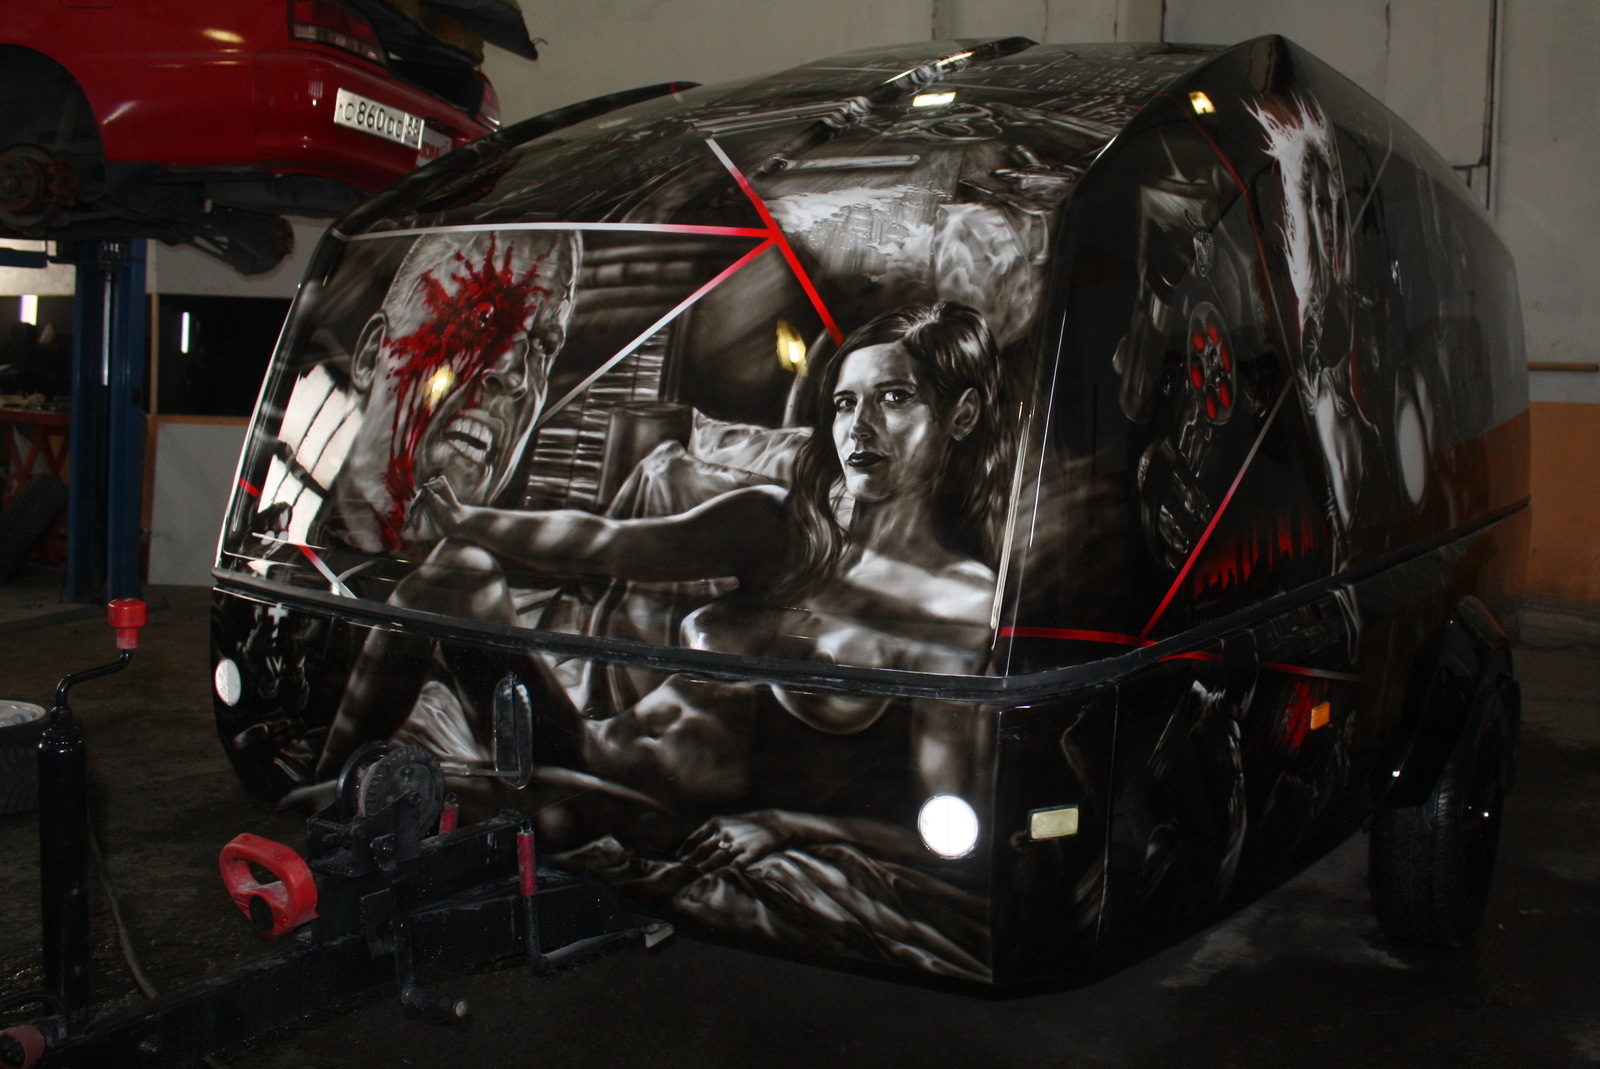 Trailer in the theme Sin City for a Tyumen motorcycle lover (many photos) - My, Airbrushing, Sin City, Longpost, Movies, Trailer, 